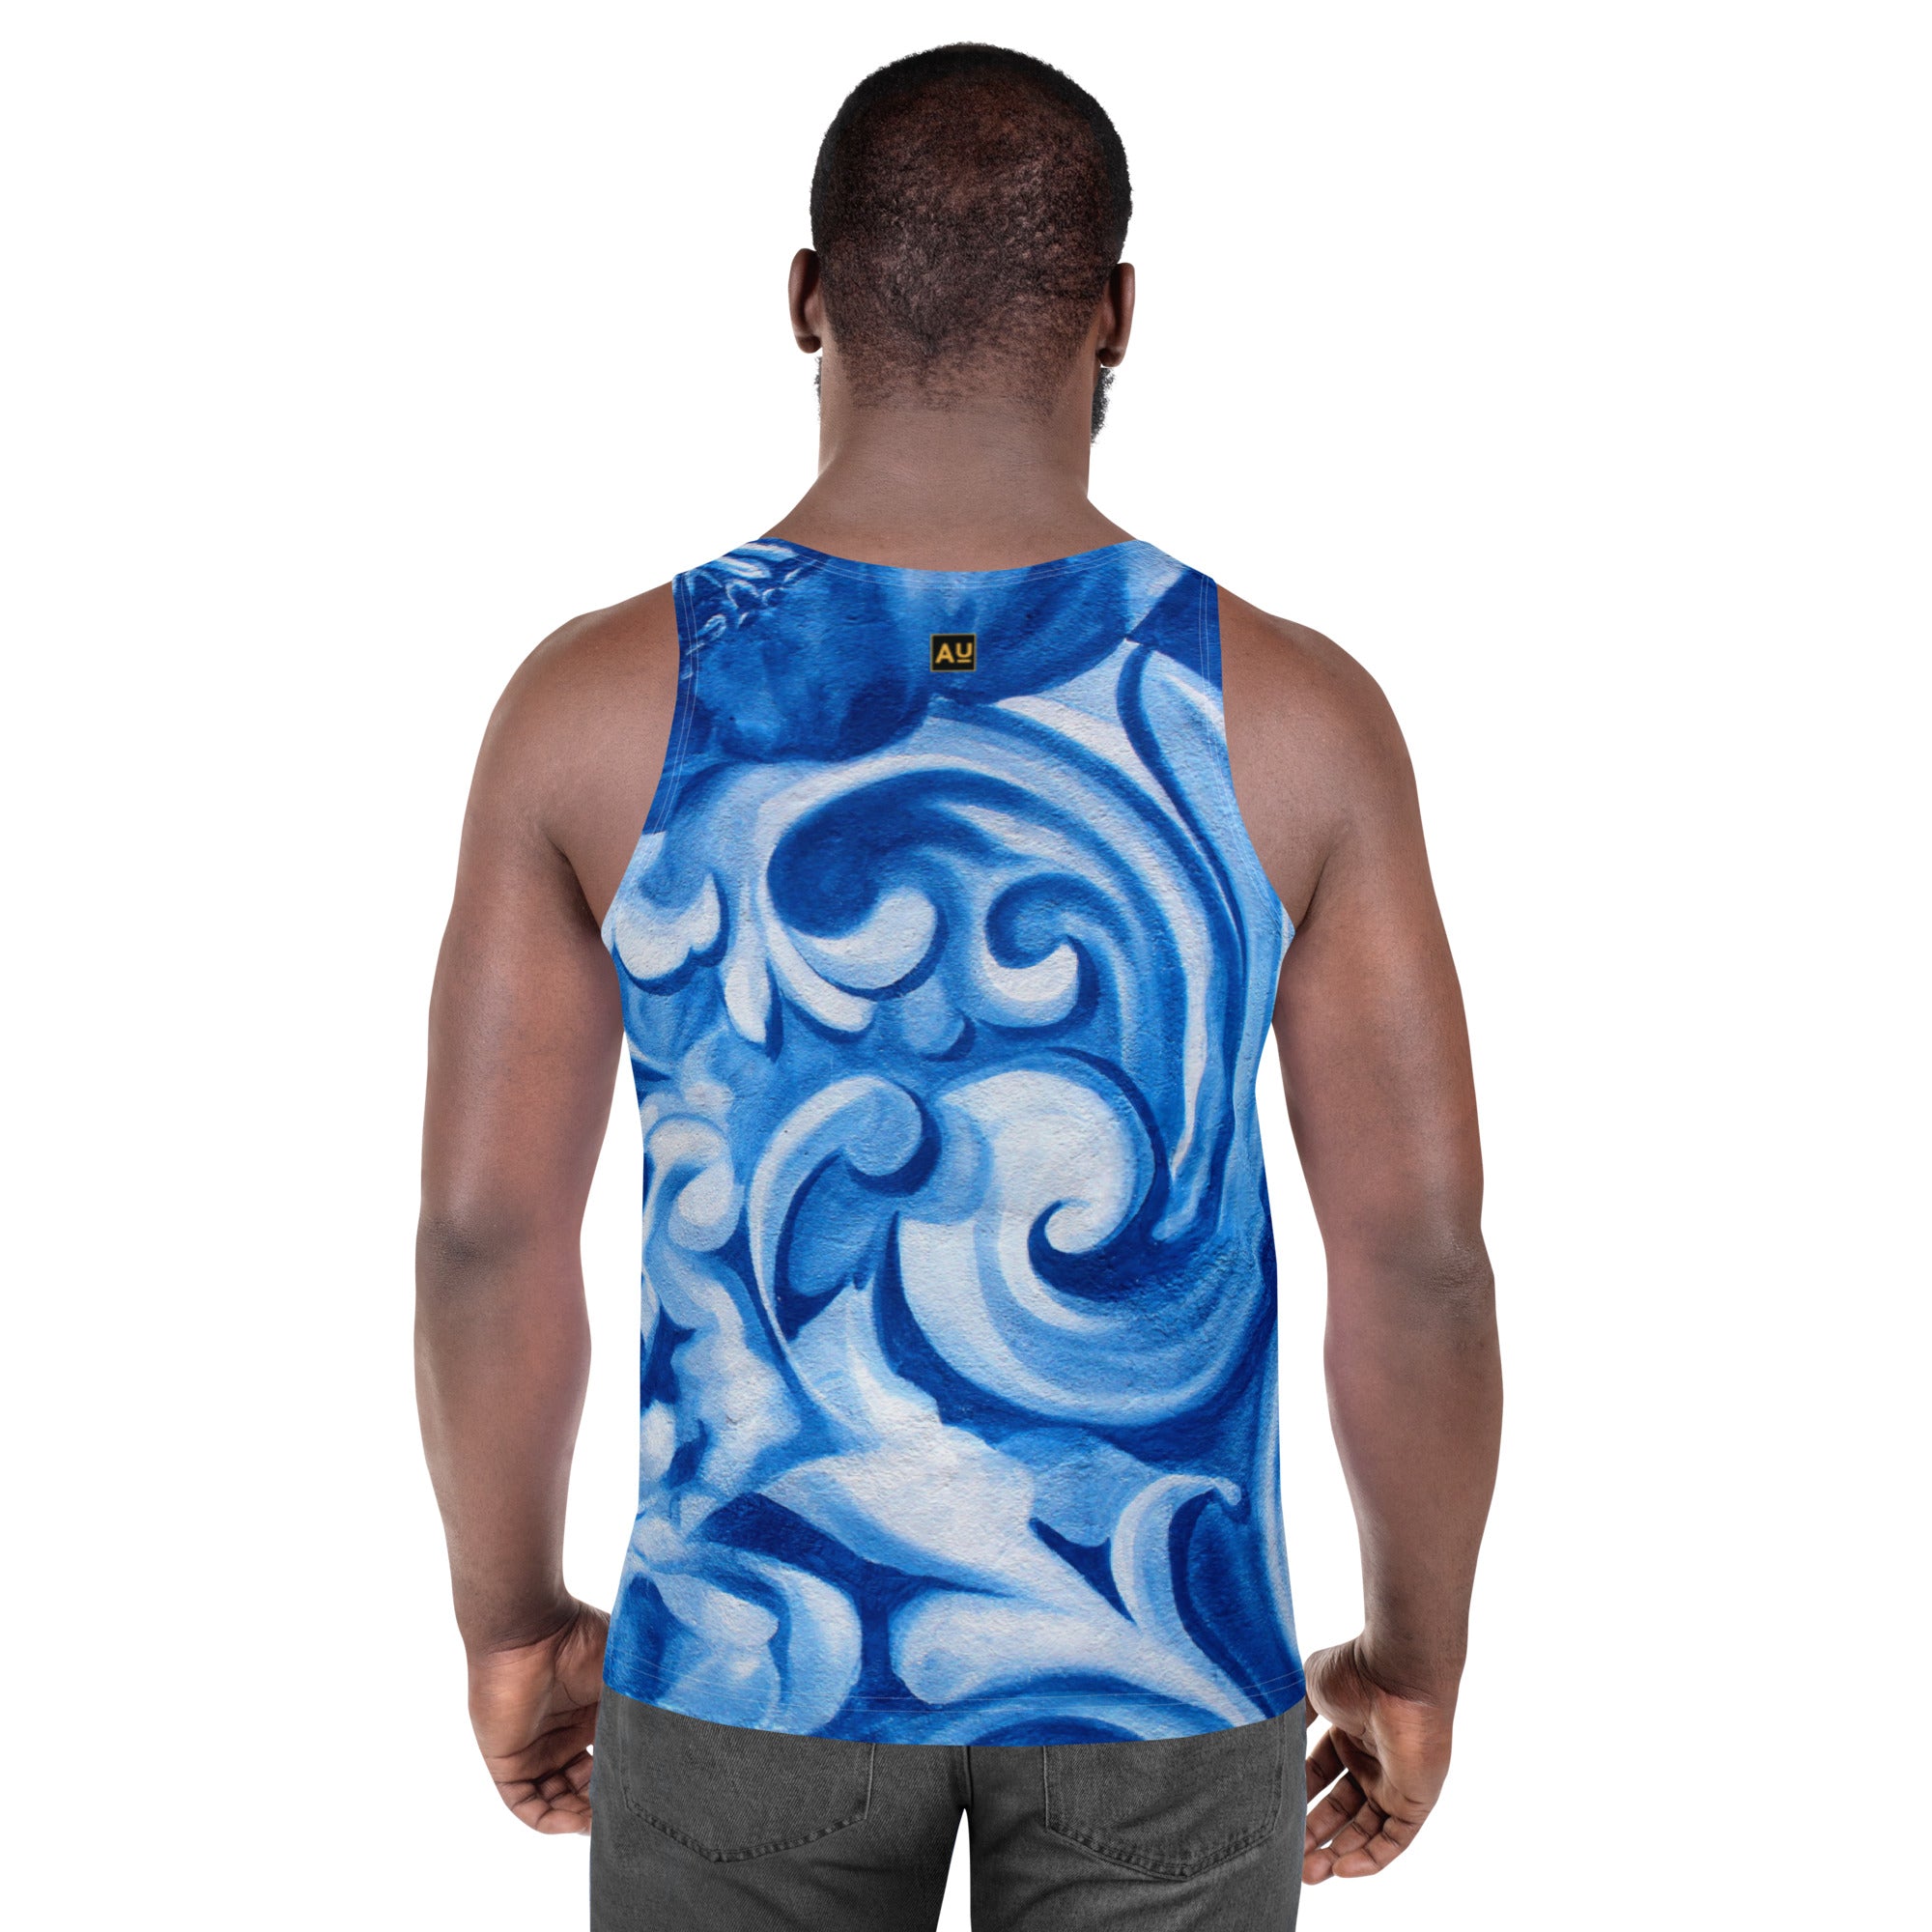 Waiting on a Miracle Men's Tank Top